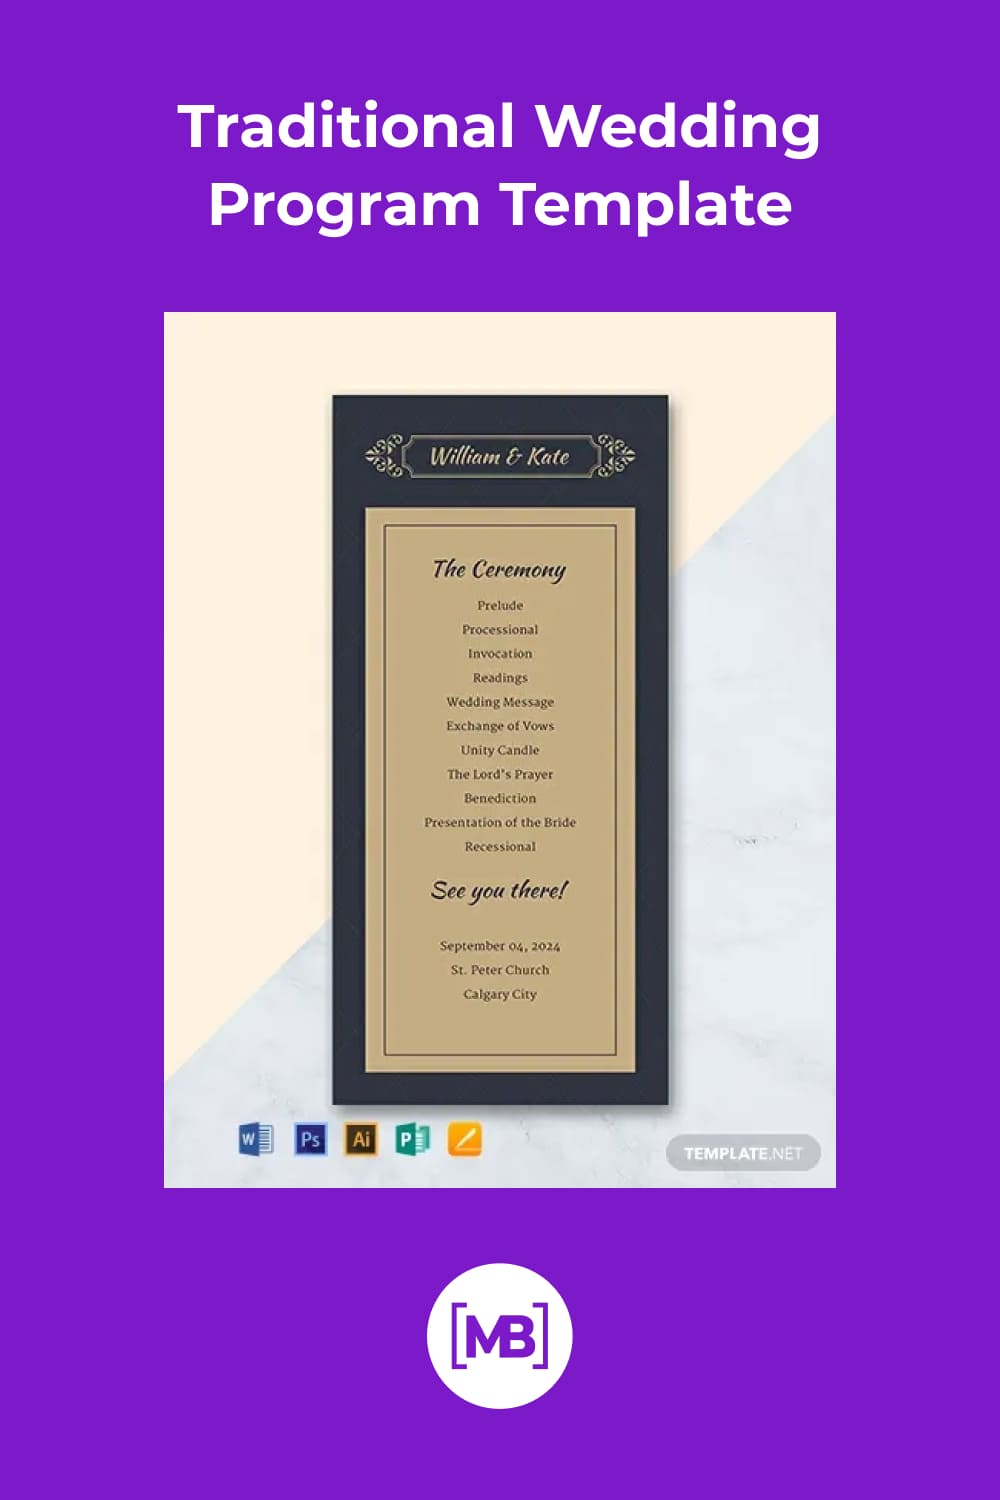 A simple and traditional program template used for wedding events.